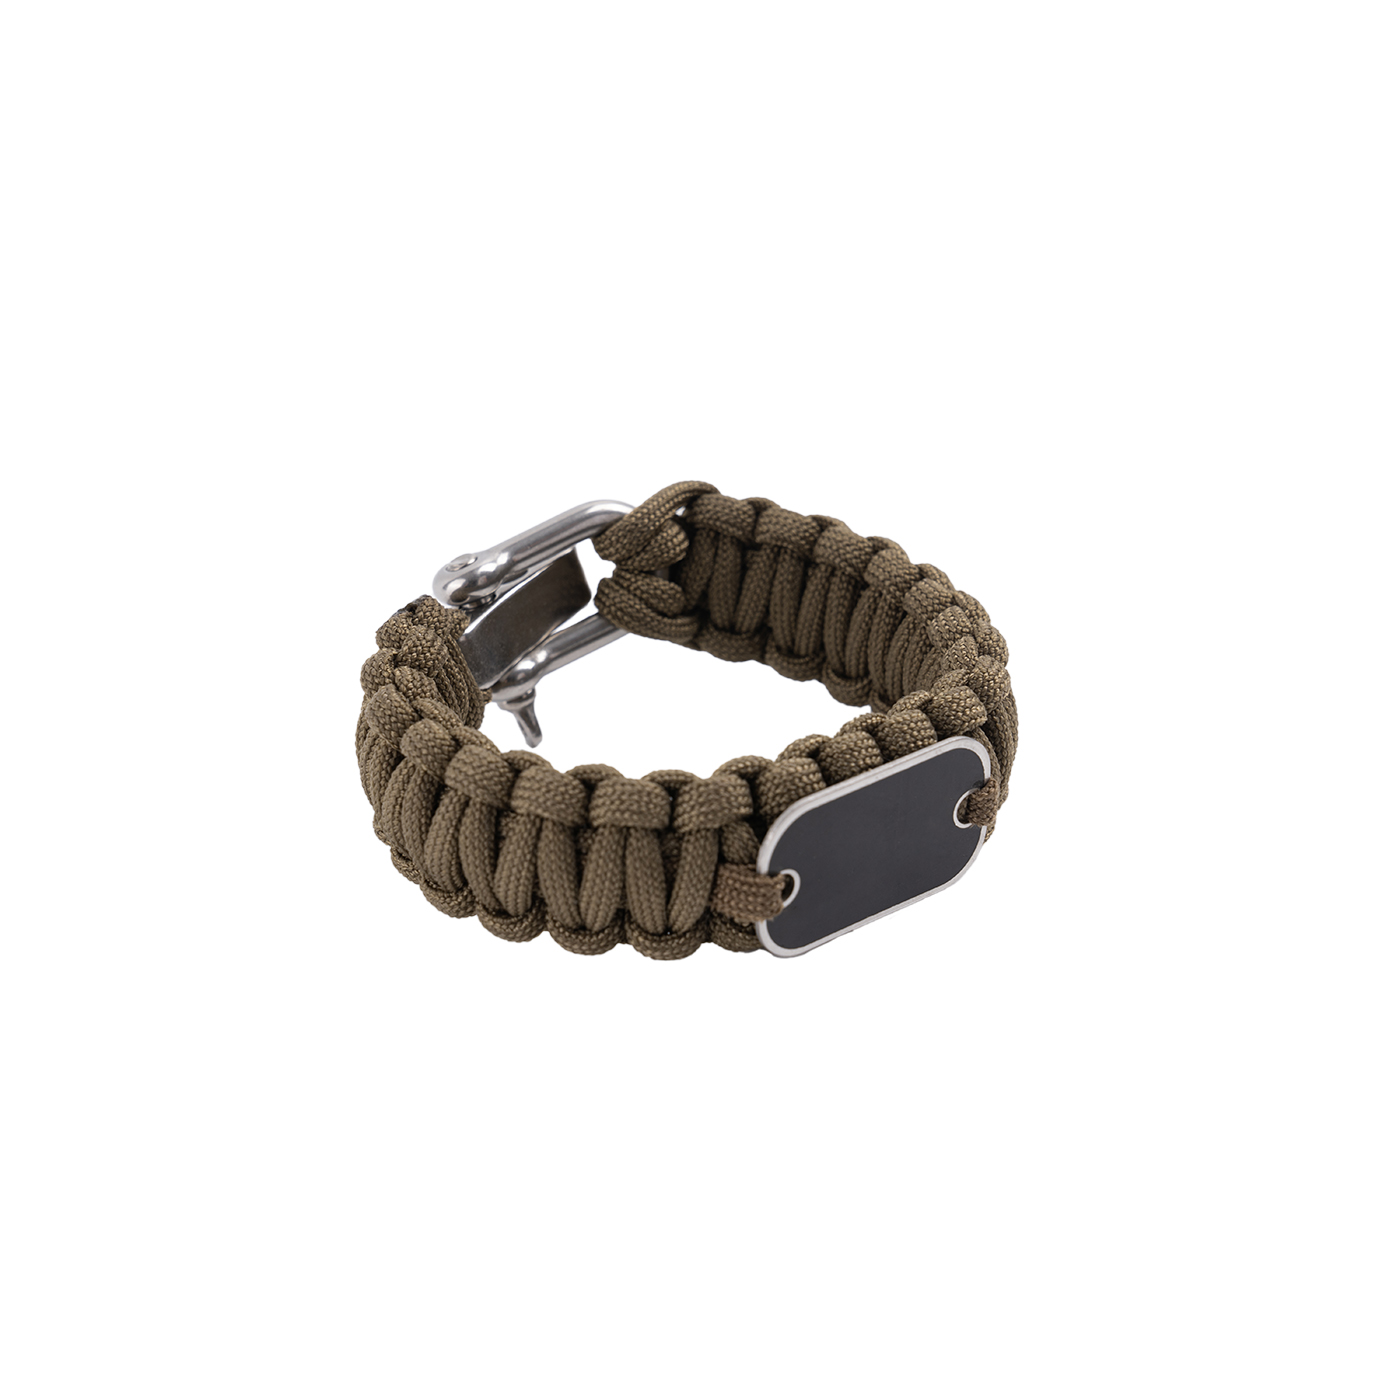 Paracord Survival Bracelet With Nameplate2